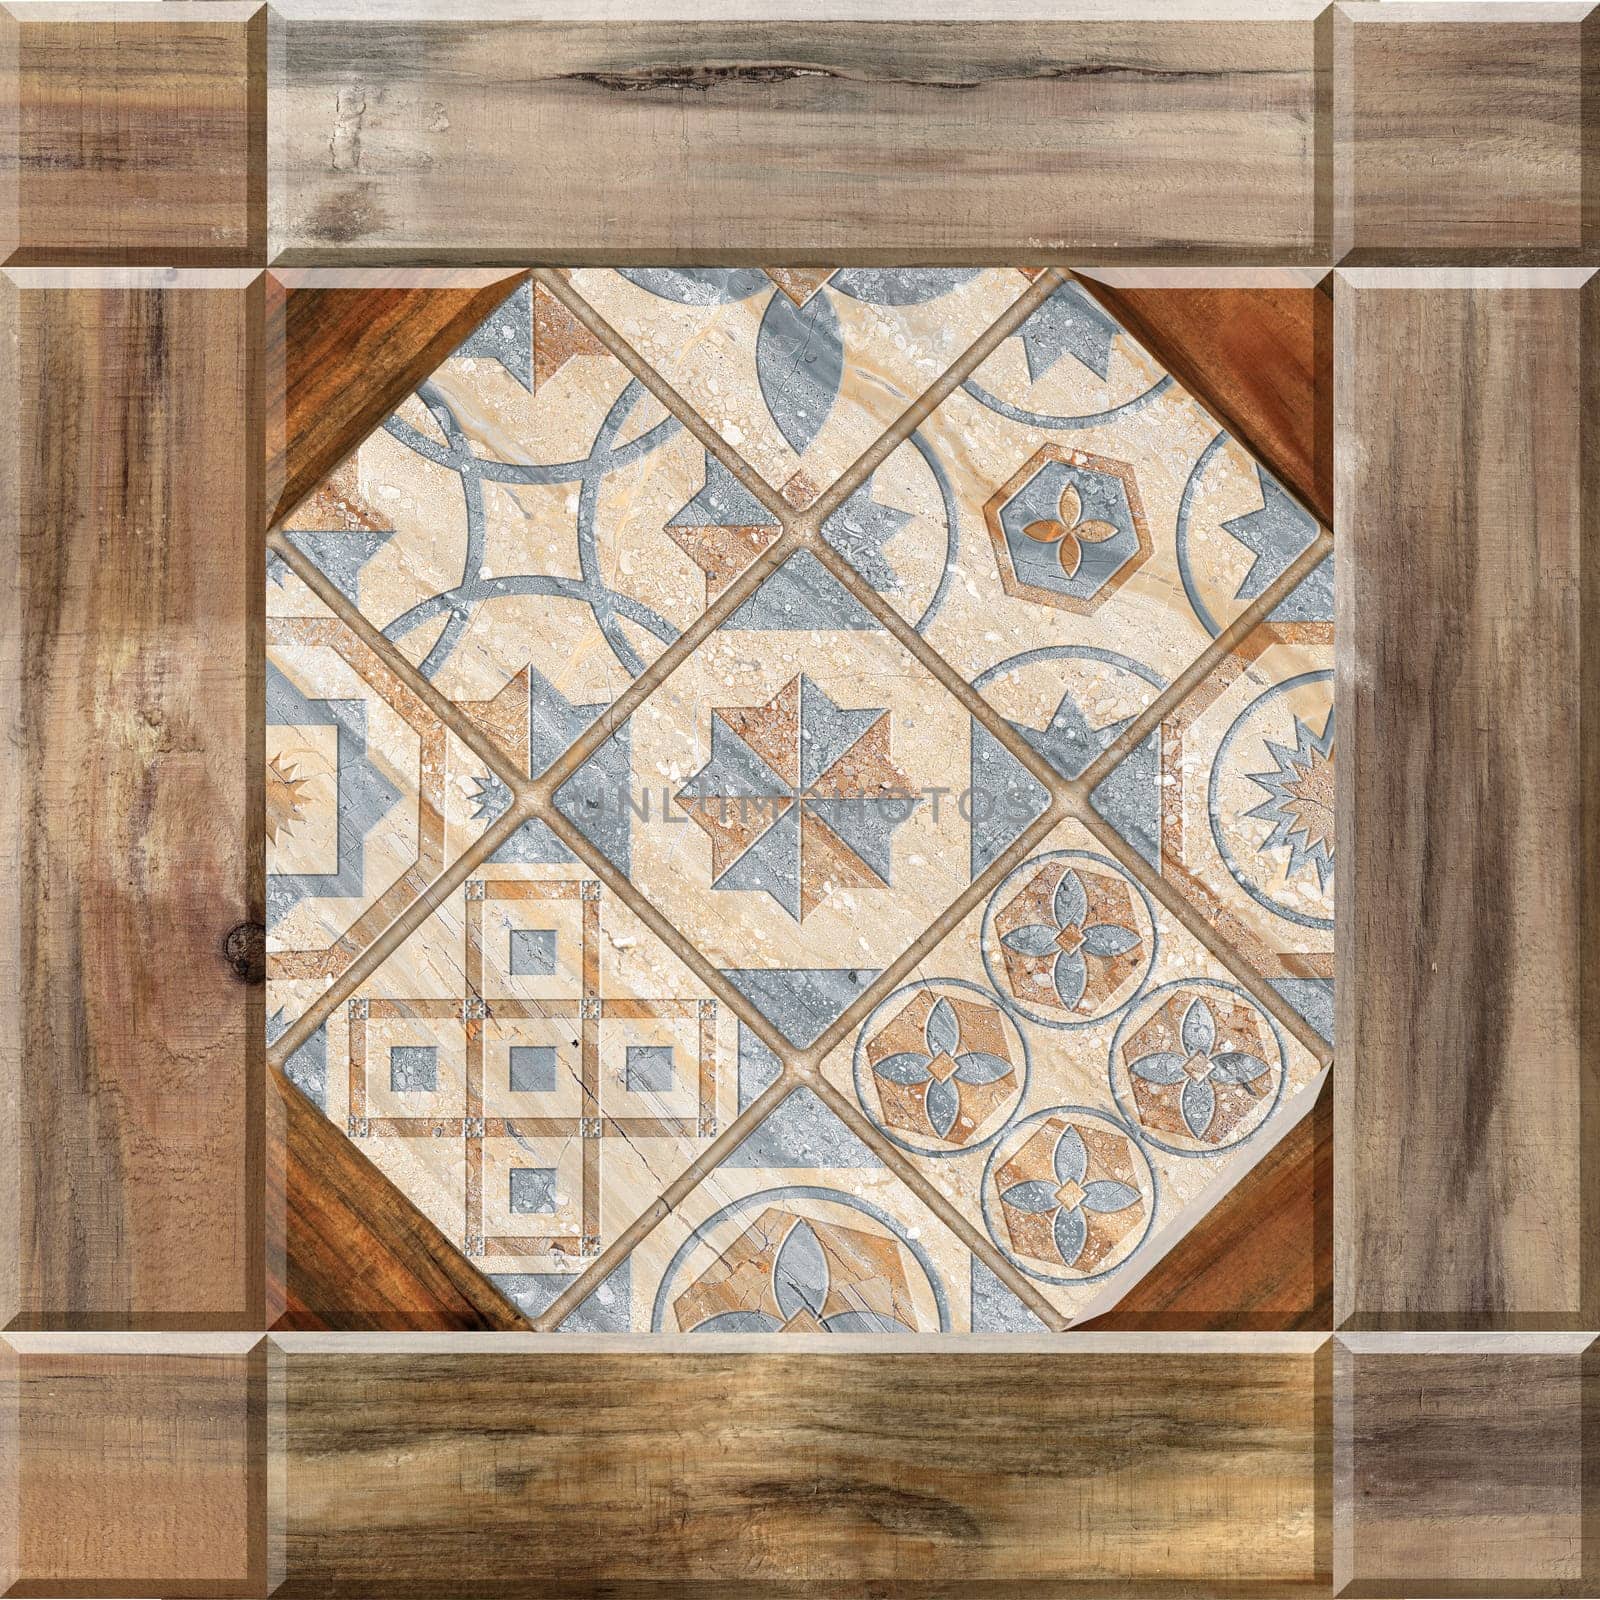 Digital tiles design. 3D rendering Colorful ceramic wall and floor tiles decoration. Abstract damask patchwork pattern with geometric and floral ornaments, Vintage tiles digital design . High quality photo